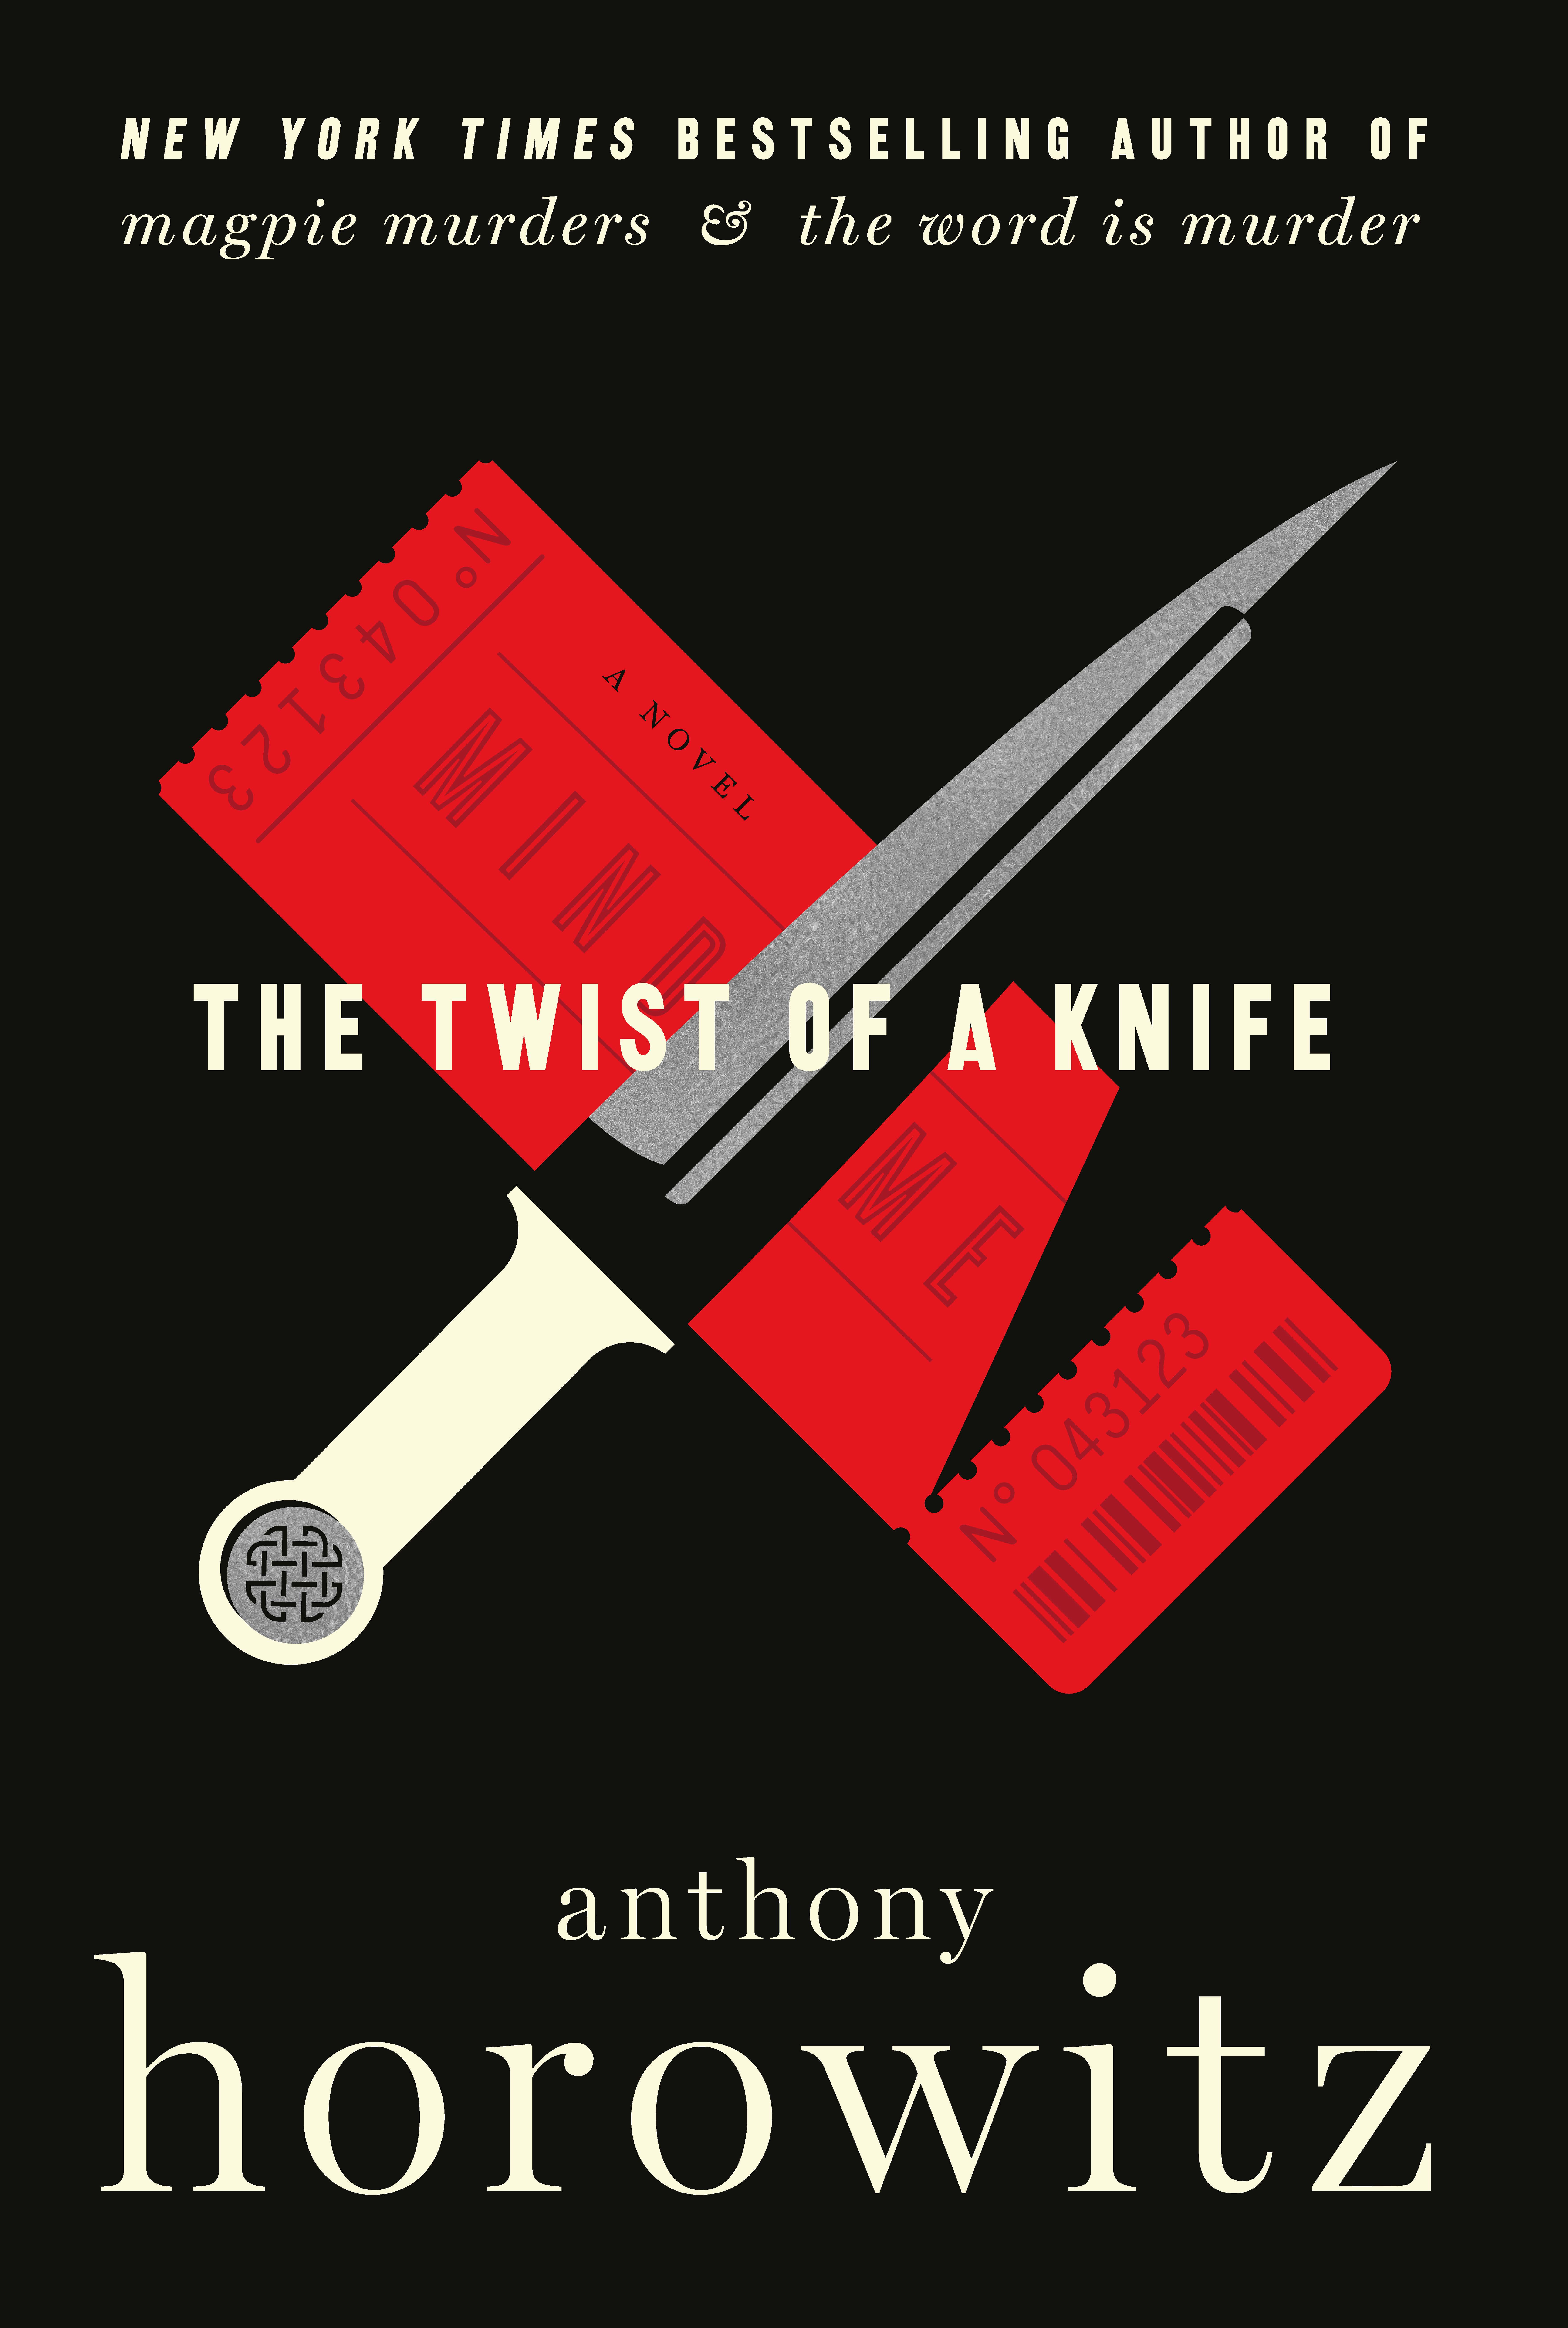 The book cover of Anthony Horowitz's The Twist of A Knife